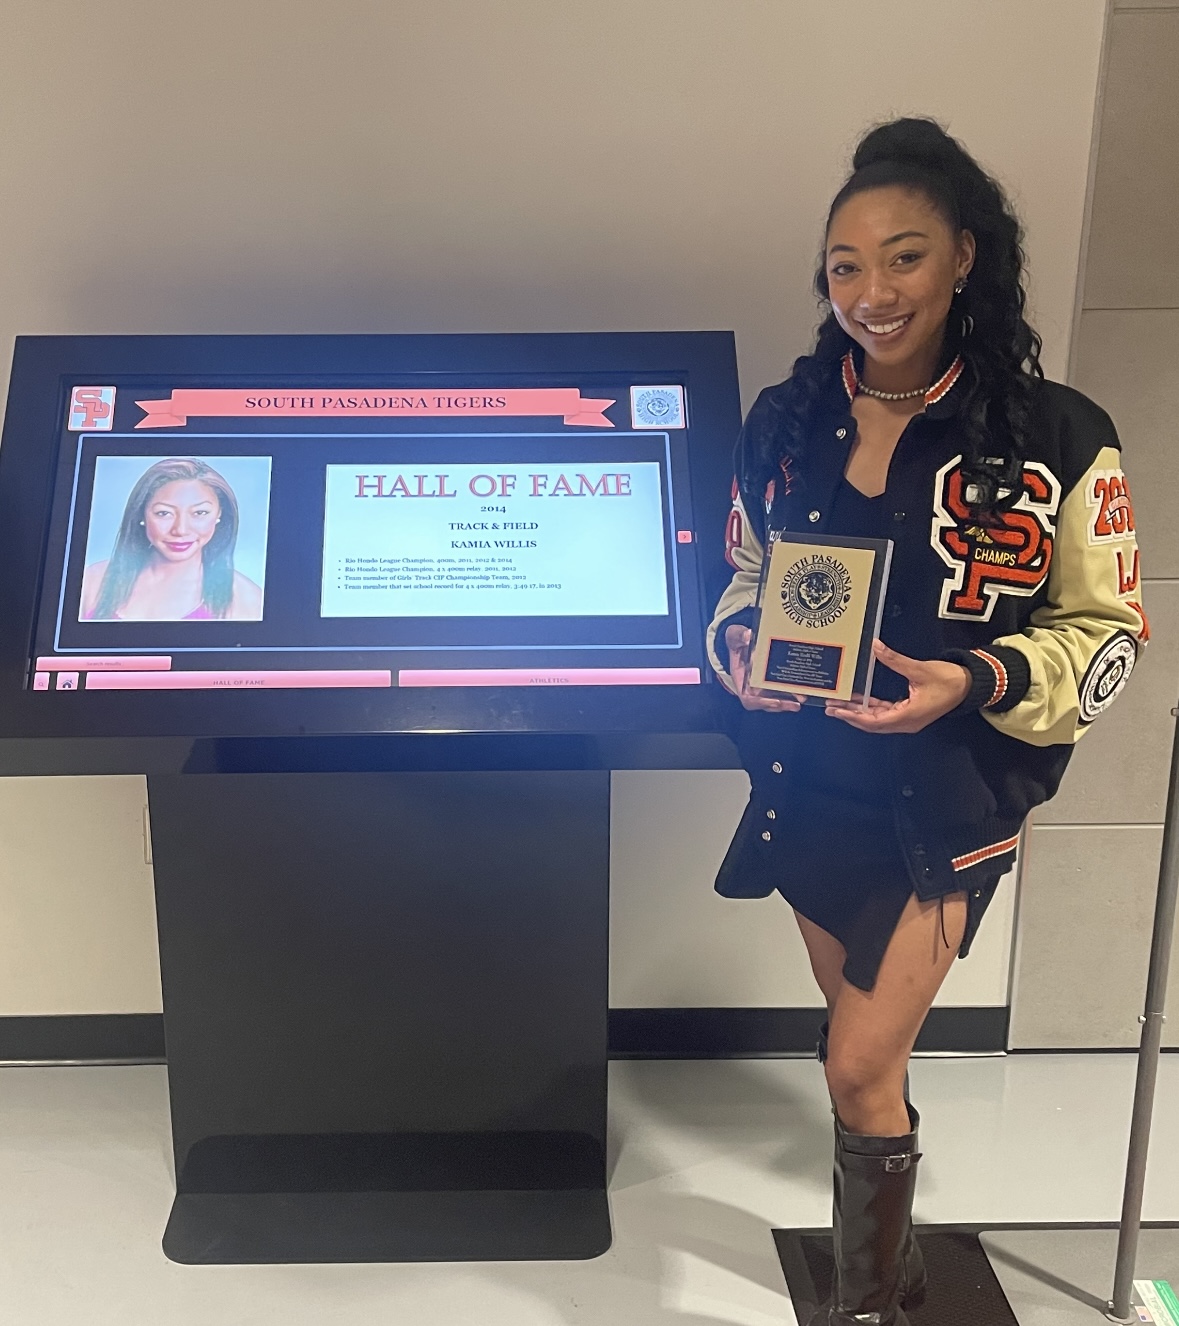 PHOTO: provided by Kamia Imani Rodil Willis | The South Pasadenan | Kami Imani, a 2014 graduate of South Pasadena High, is among the contestants in this year’s Miss California USA Pageant. She is a member of the school’s Hall of Fame, earning the high honor as a record holding athlete in track.